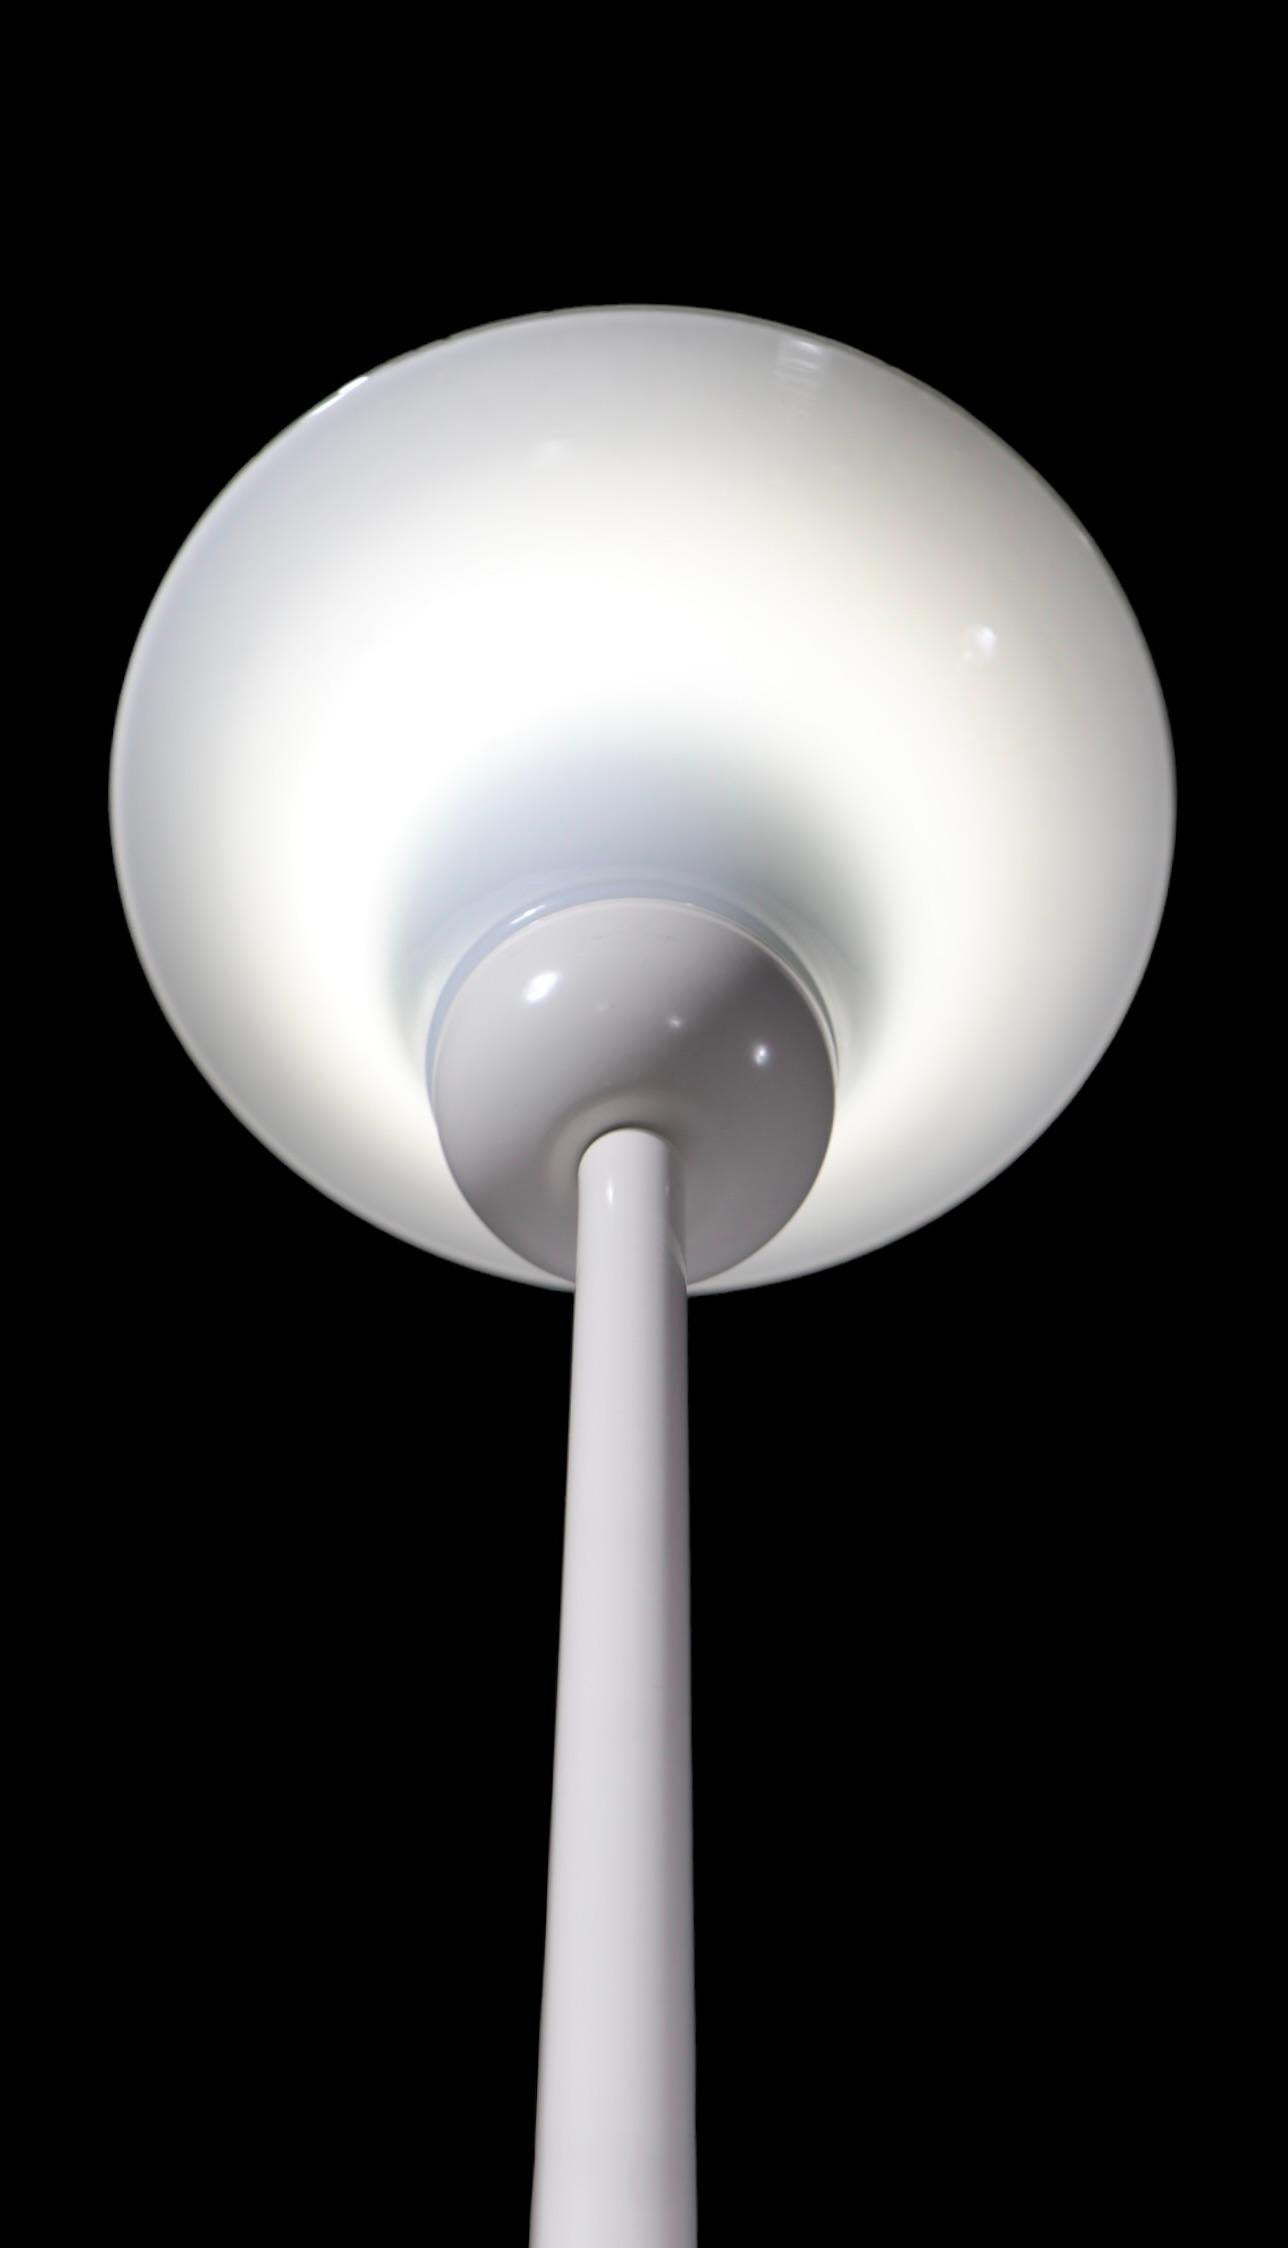 Sophisticated modern  minimalist design, white on white floor lamp, made  by Ikea, in the style of Max Bill, circa 1970/80's. The lamp features an elegant elongated vertical center post, with white glass cup form shade top, and foot operated in line